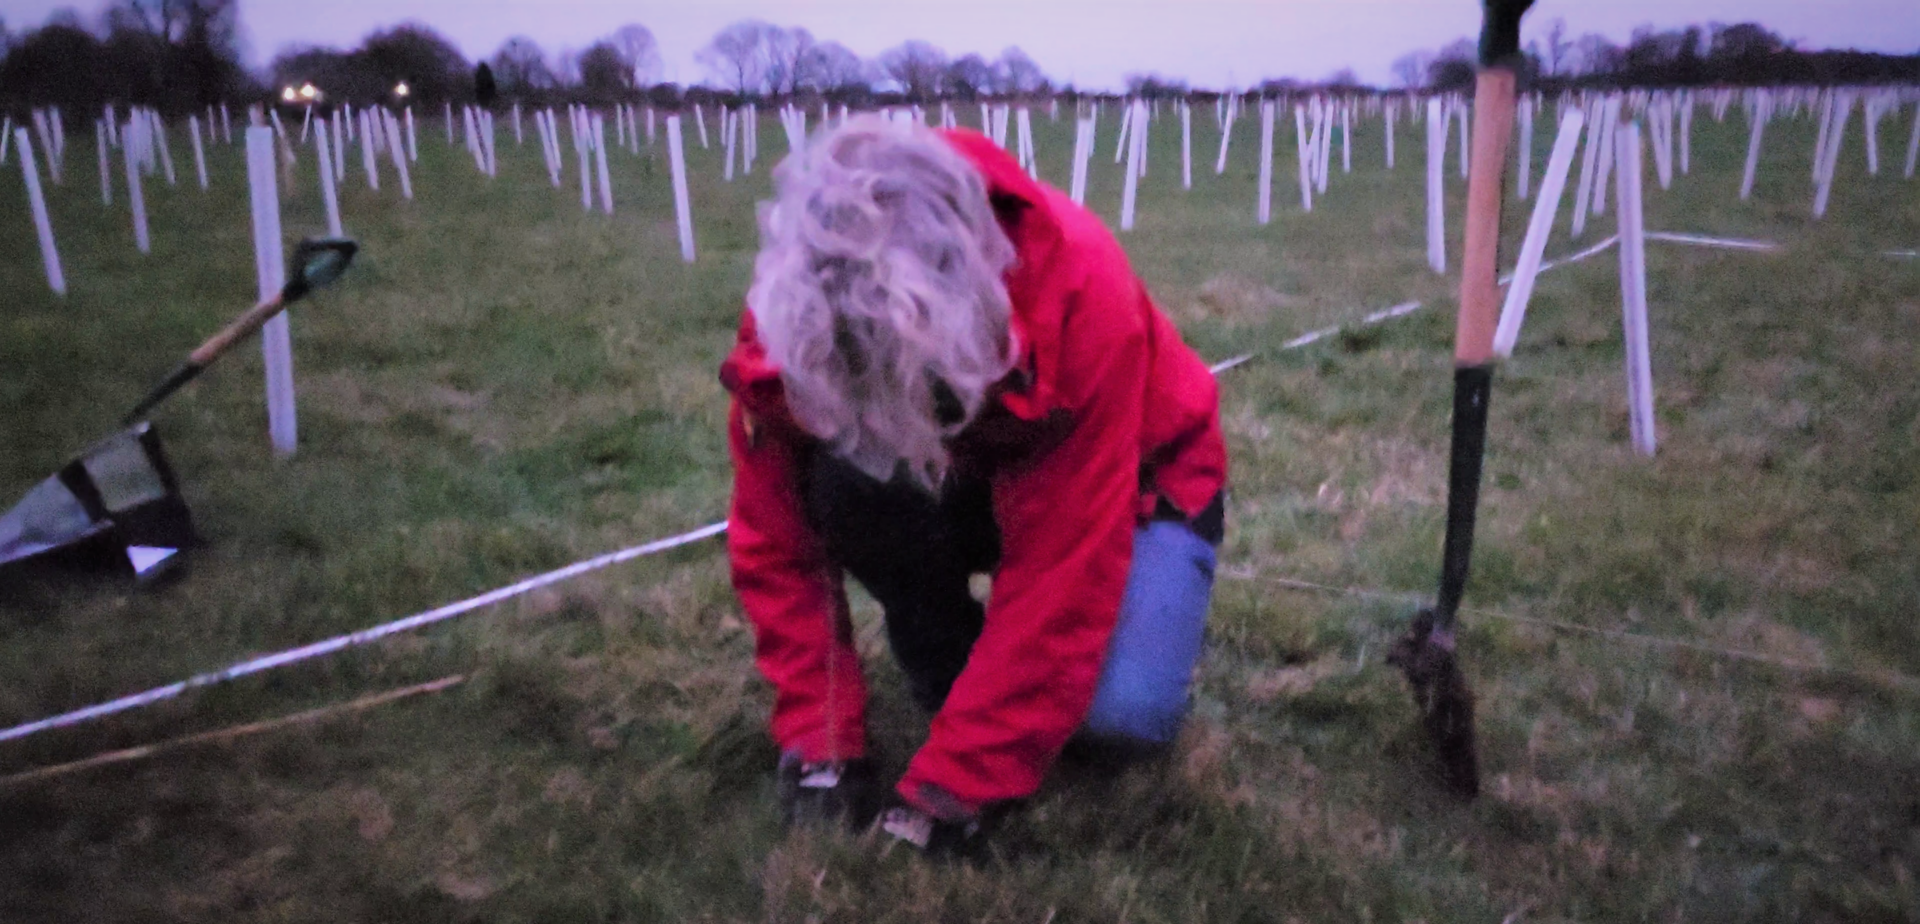 Someone in a red coat, kneeling amongst tree protection tubes, planting a seedling at twilight